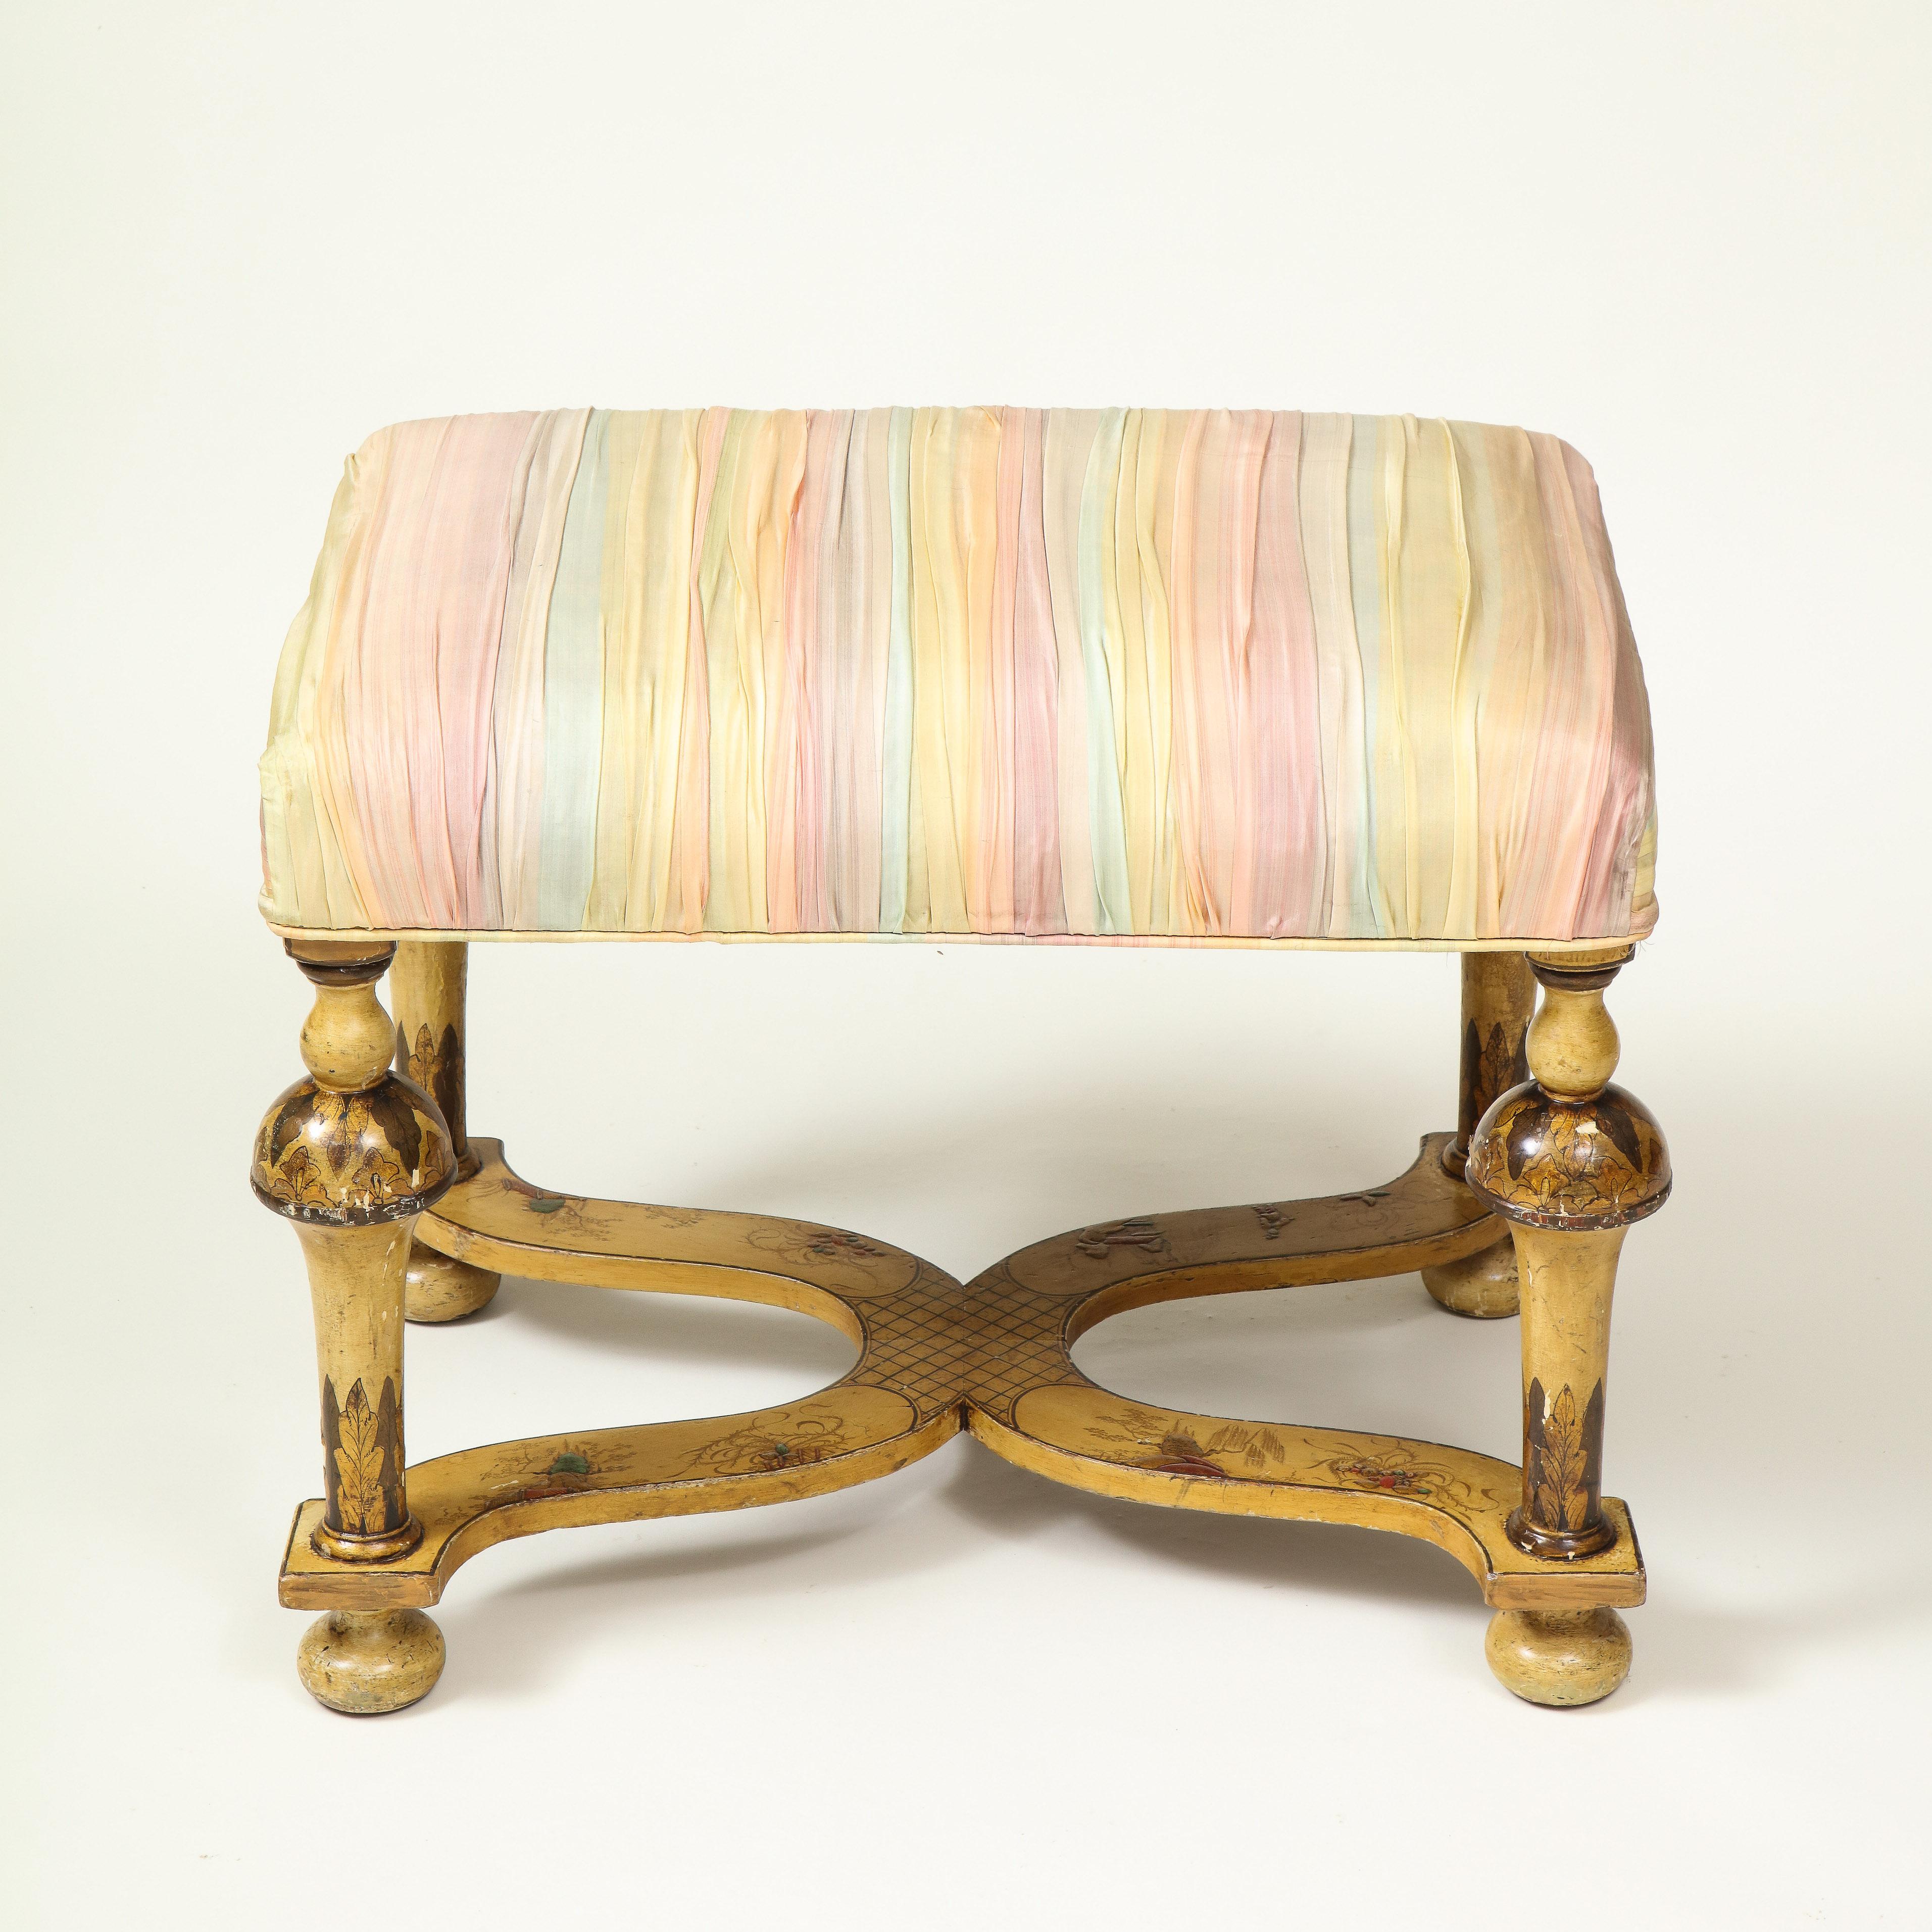 The ruched-silk over-upholstered rectangular seat raised on baluster-form legs joined by a shaped stretcher, painted with chinoiserie decoration.

Provenance: From the Collection of Mario Buatta, New York, NY.